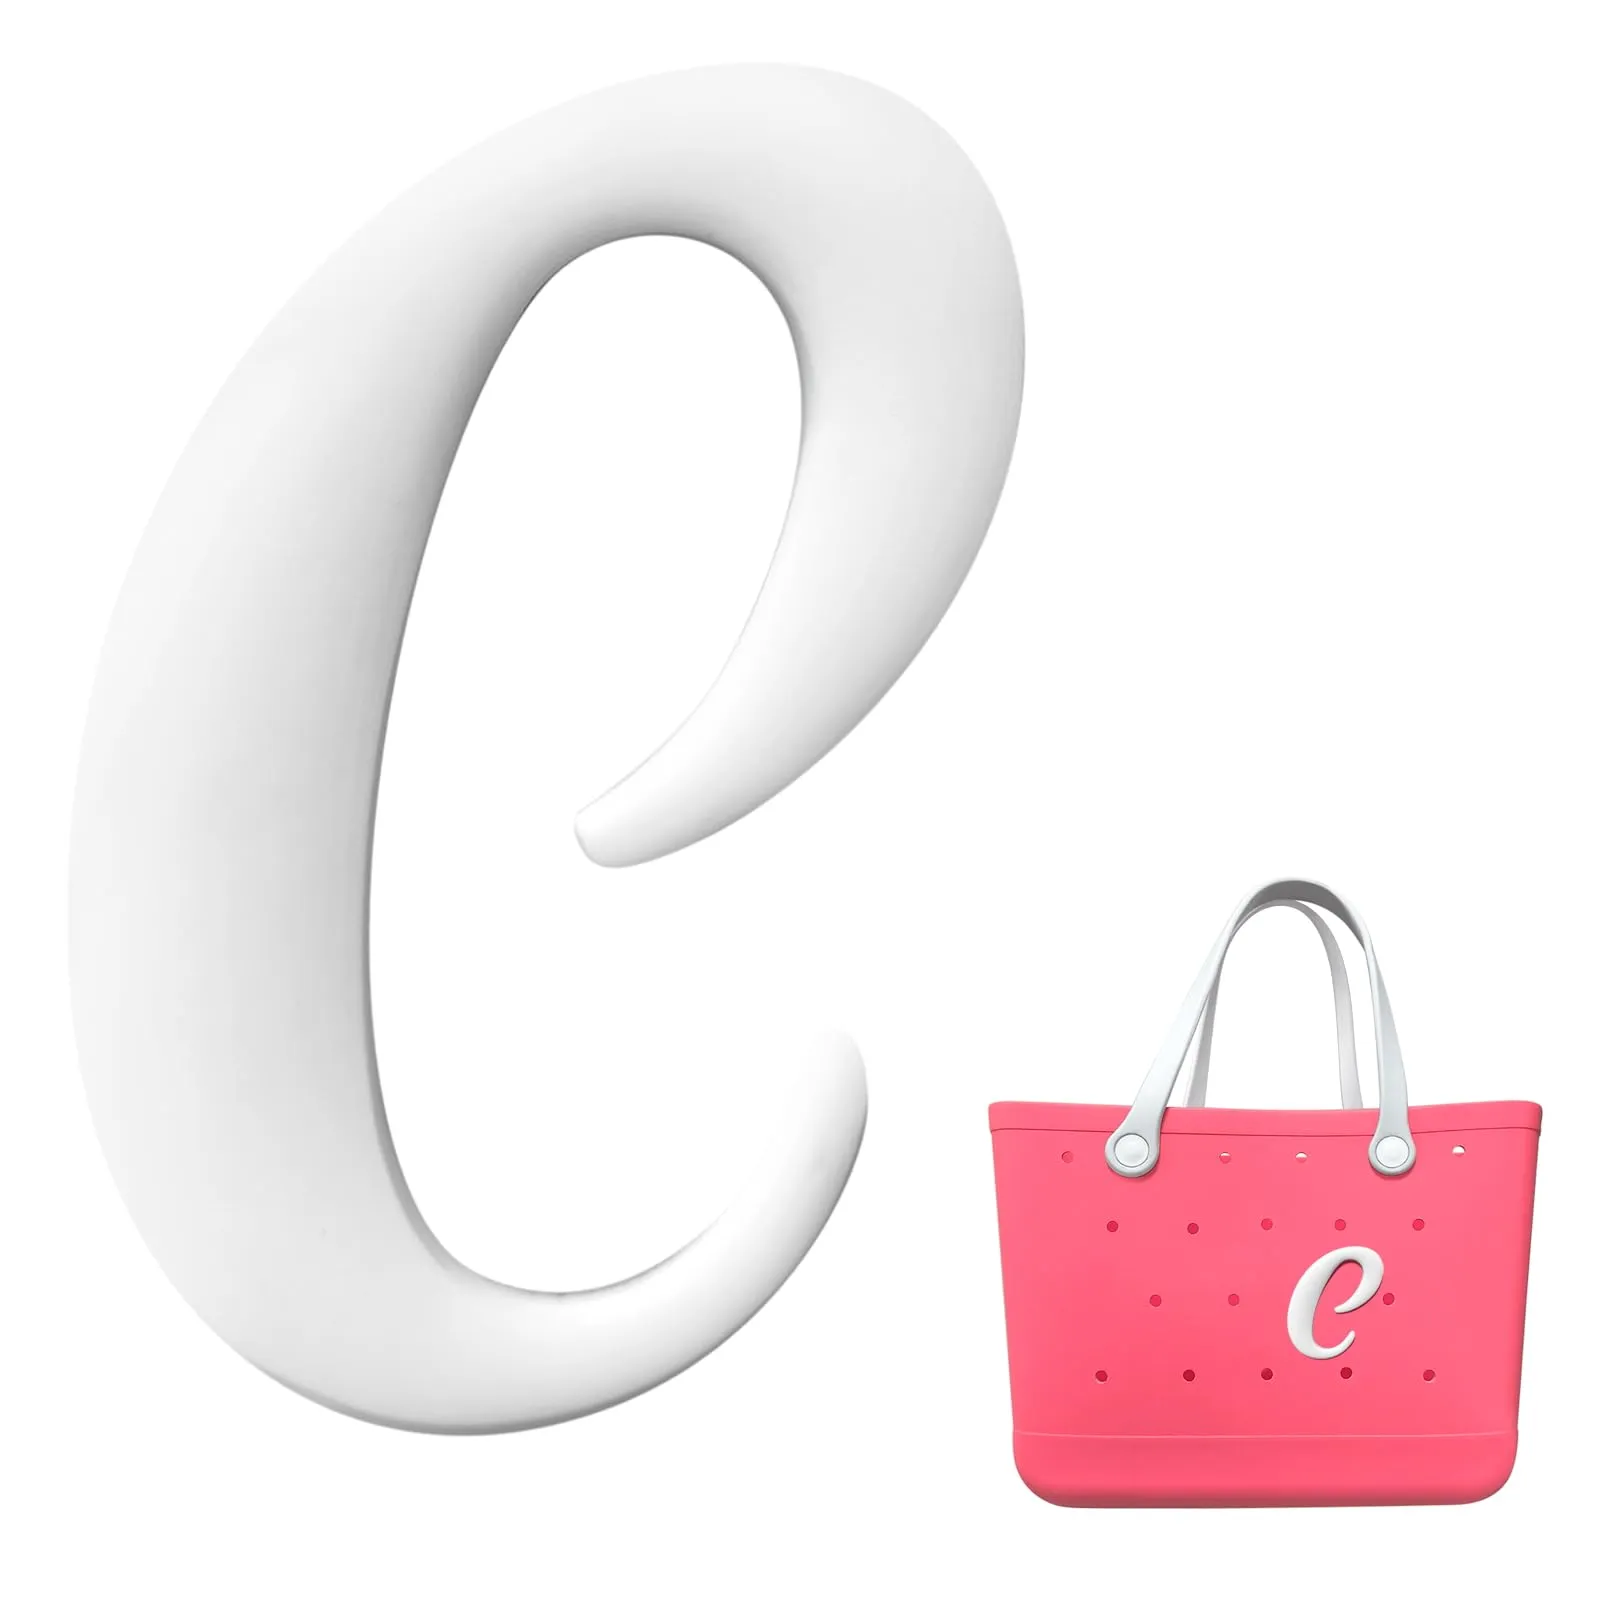 decorative alphabet letteringl accessories compatible with bogg bags charm inserts for bogg bag personalize your tote bag with alphabet letters white